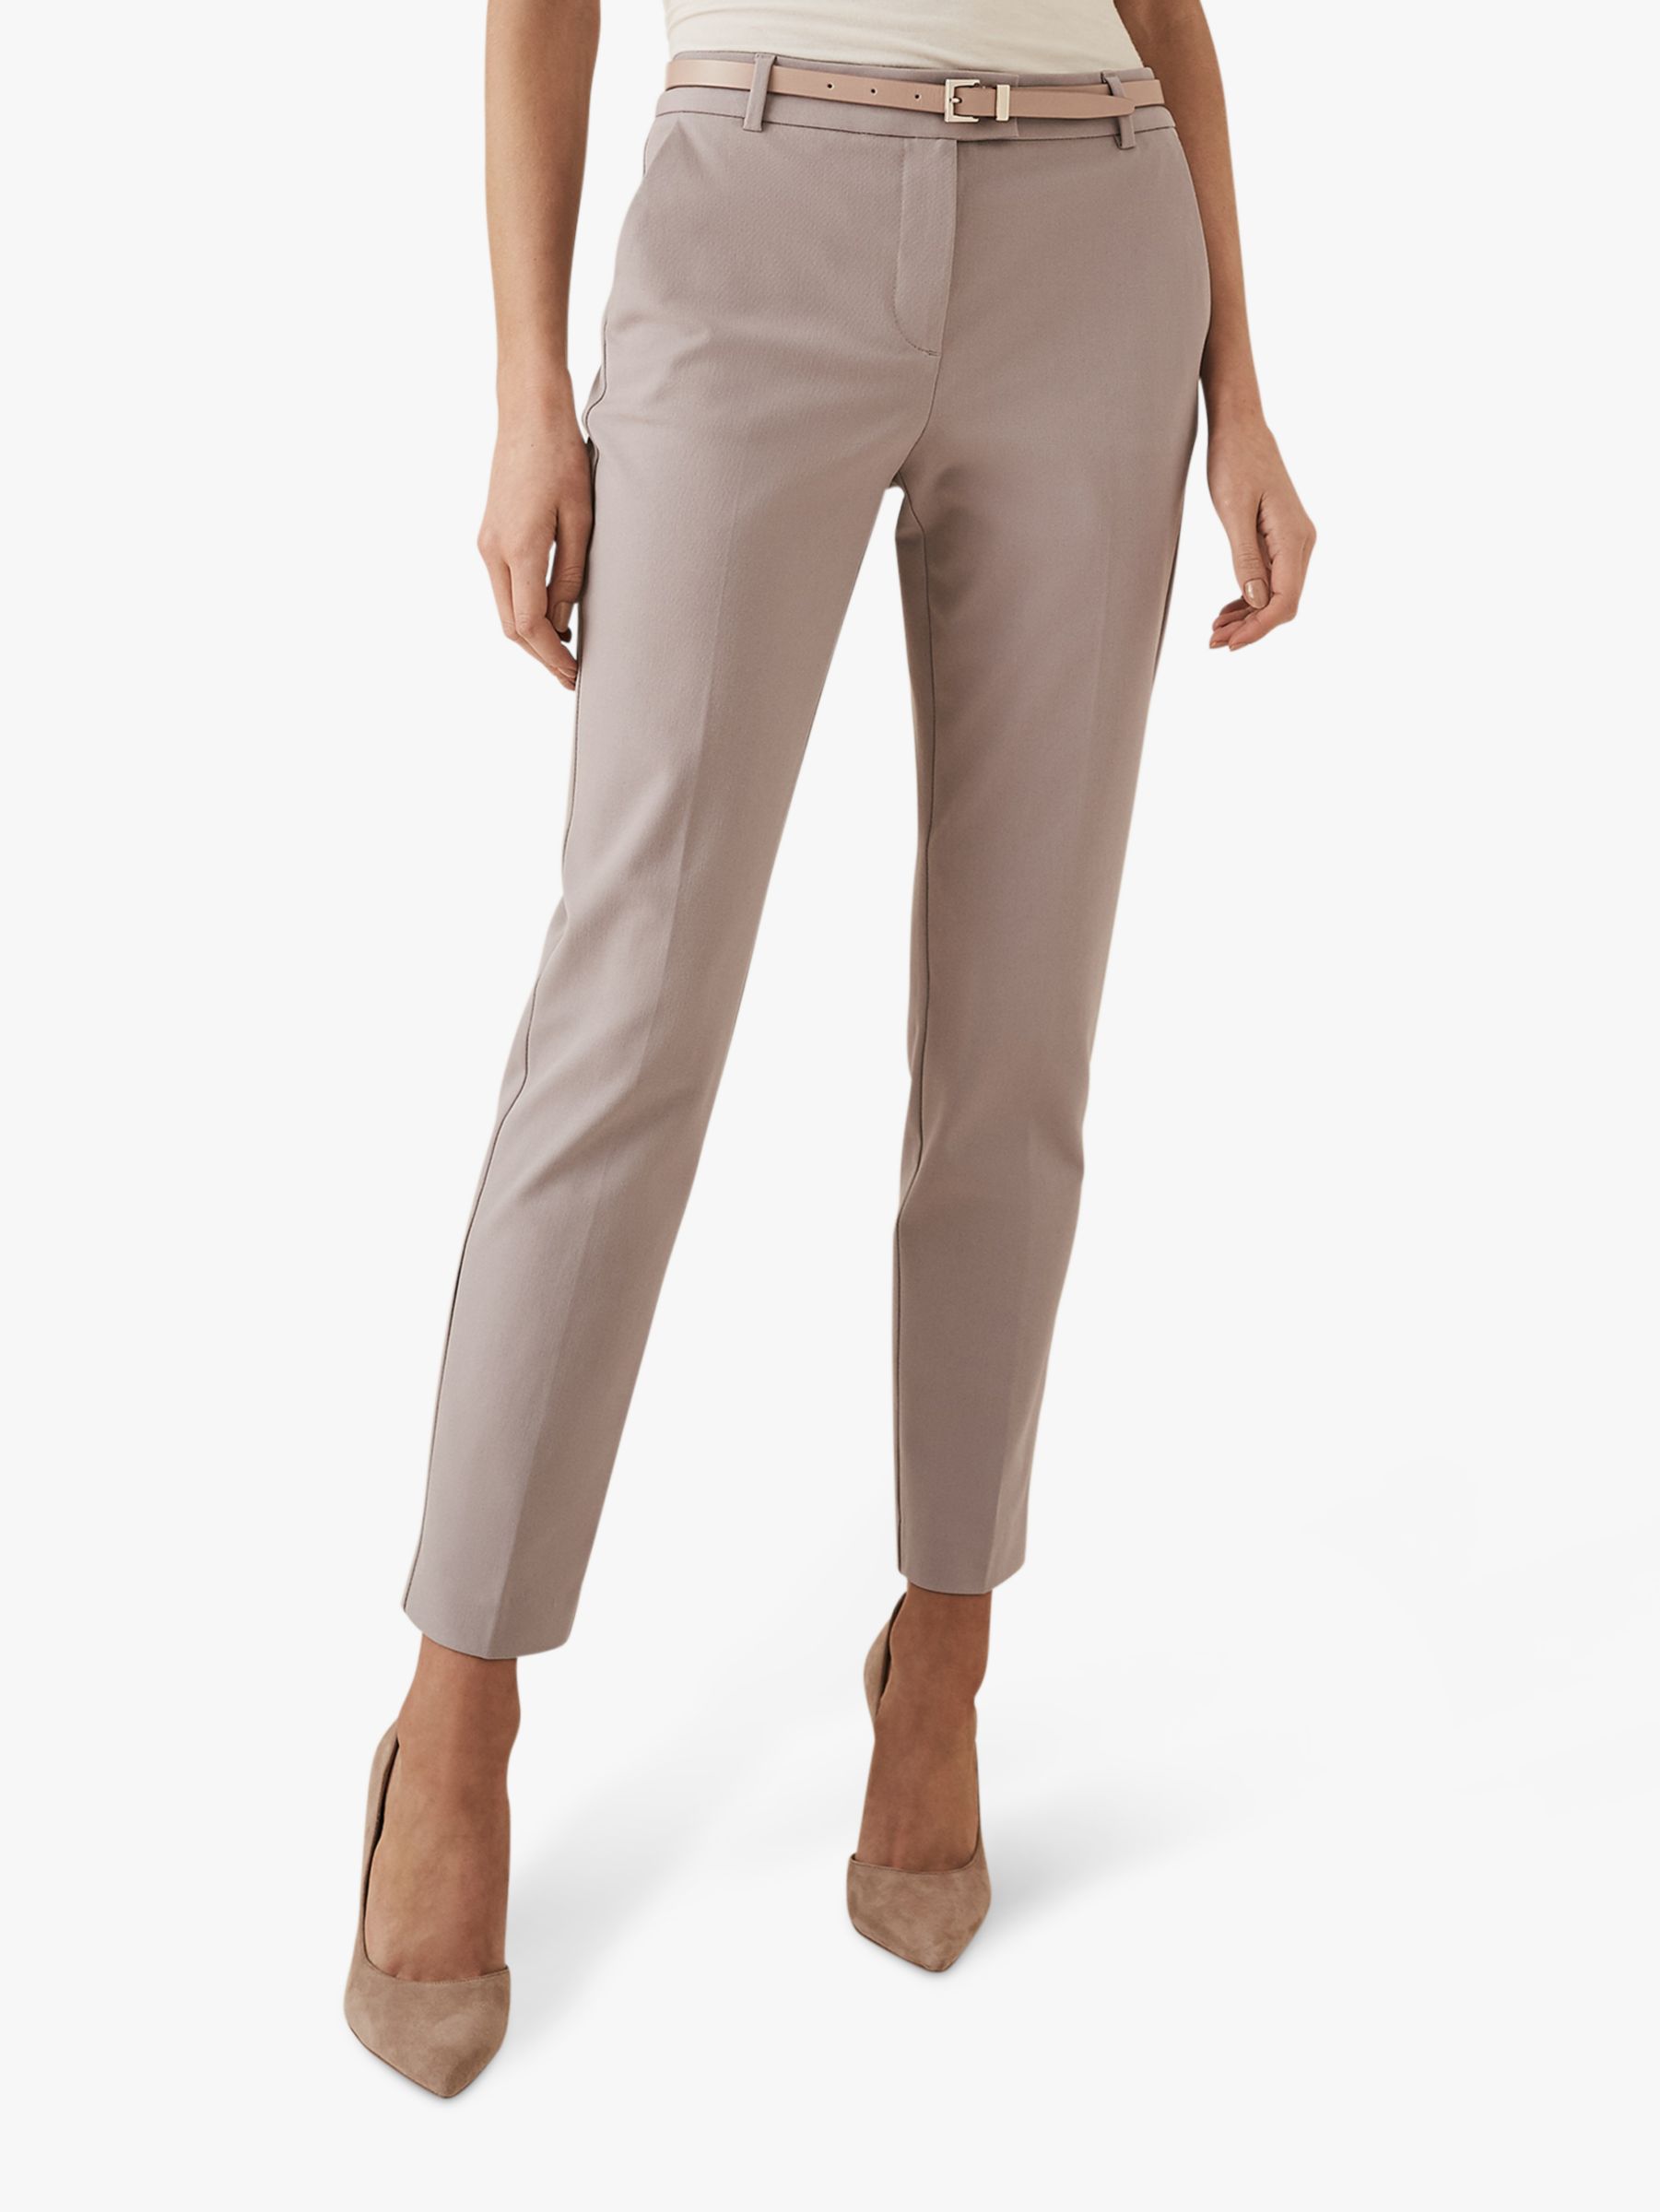 Reiss Joanne Casual Straight Trousers, Grey at John Lewis & Partners